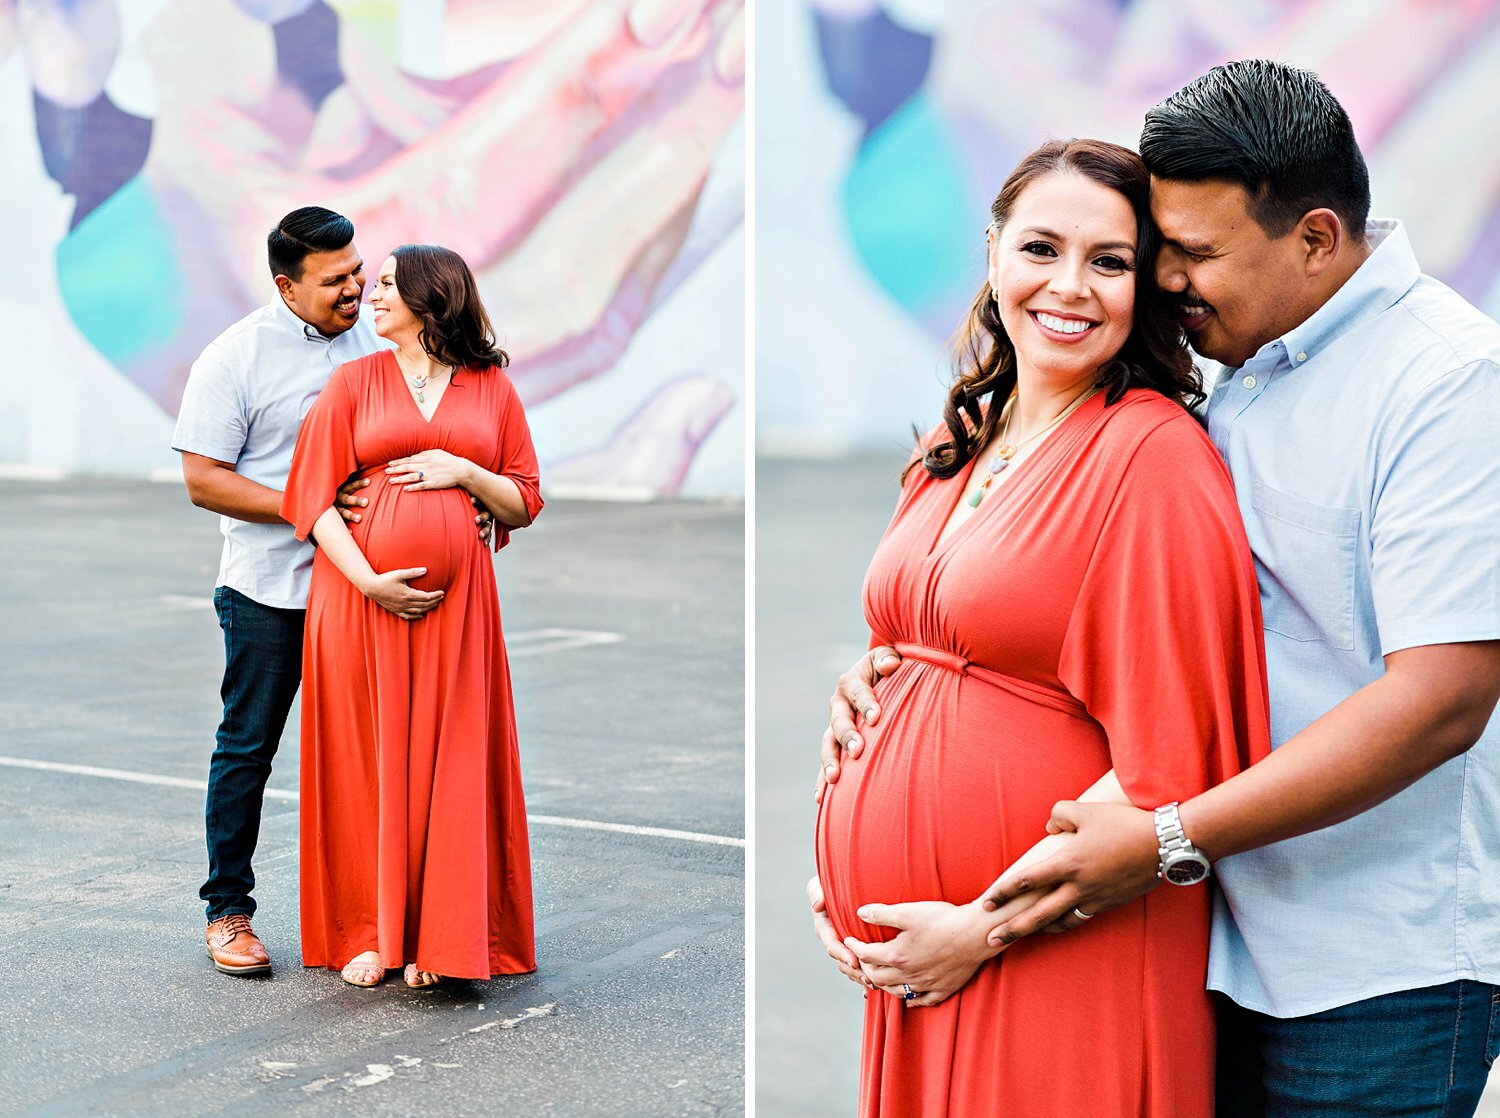 Los Angeles Arts District Engagement Session - Estee and Jose_0038.jpg